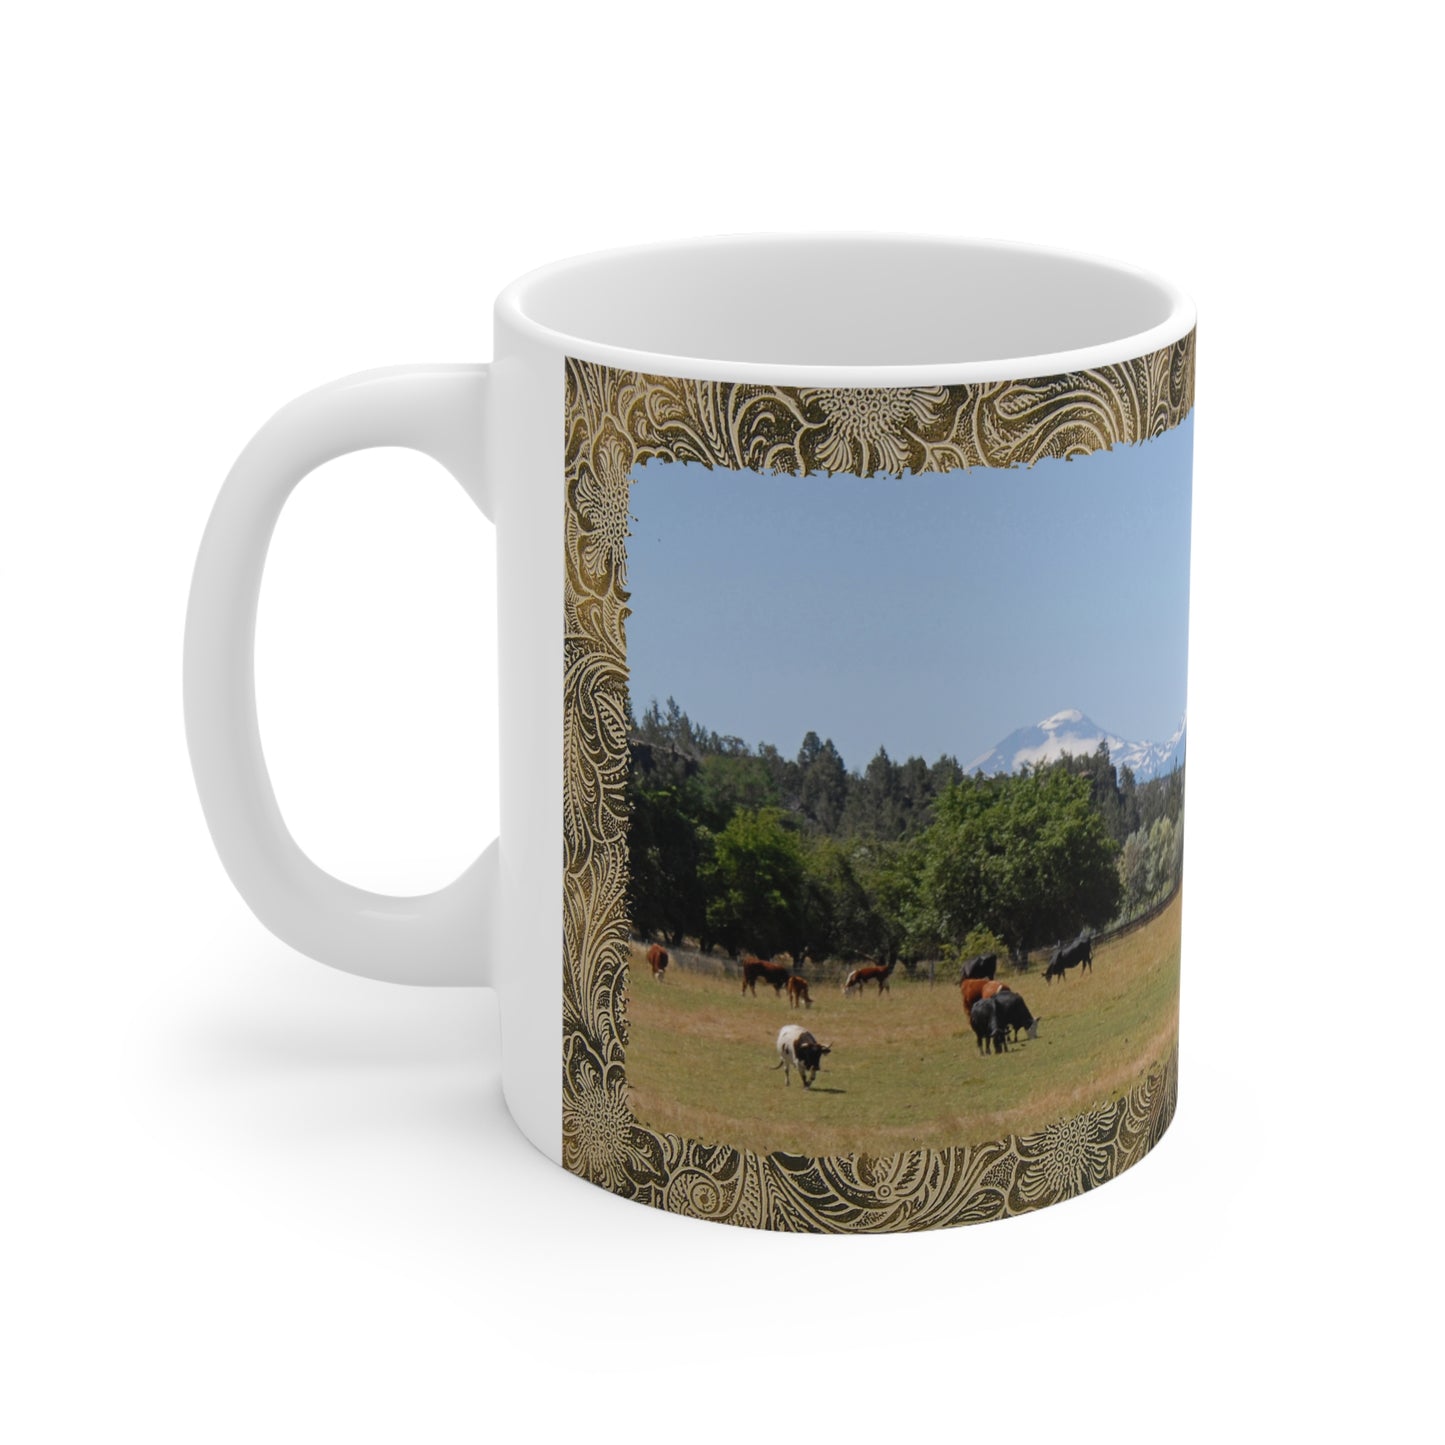 Picturesque Cattle with Leather Print Ceramic Mug 11oz